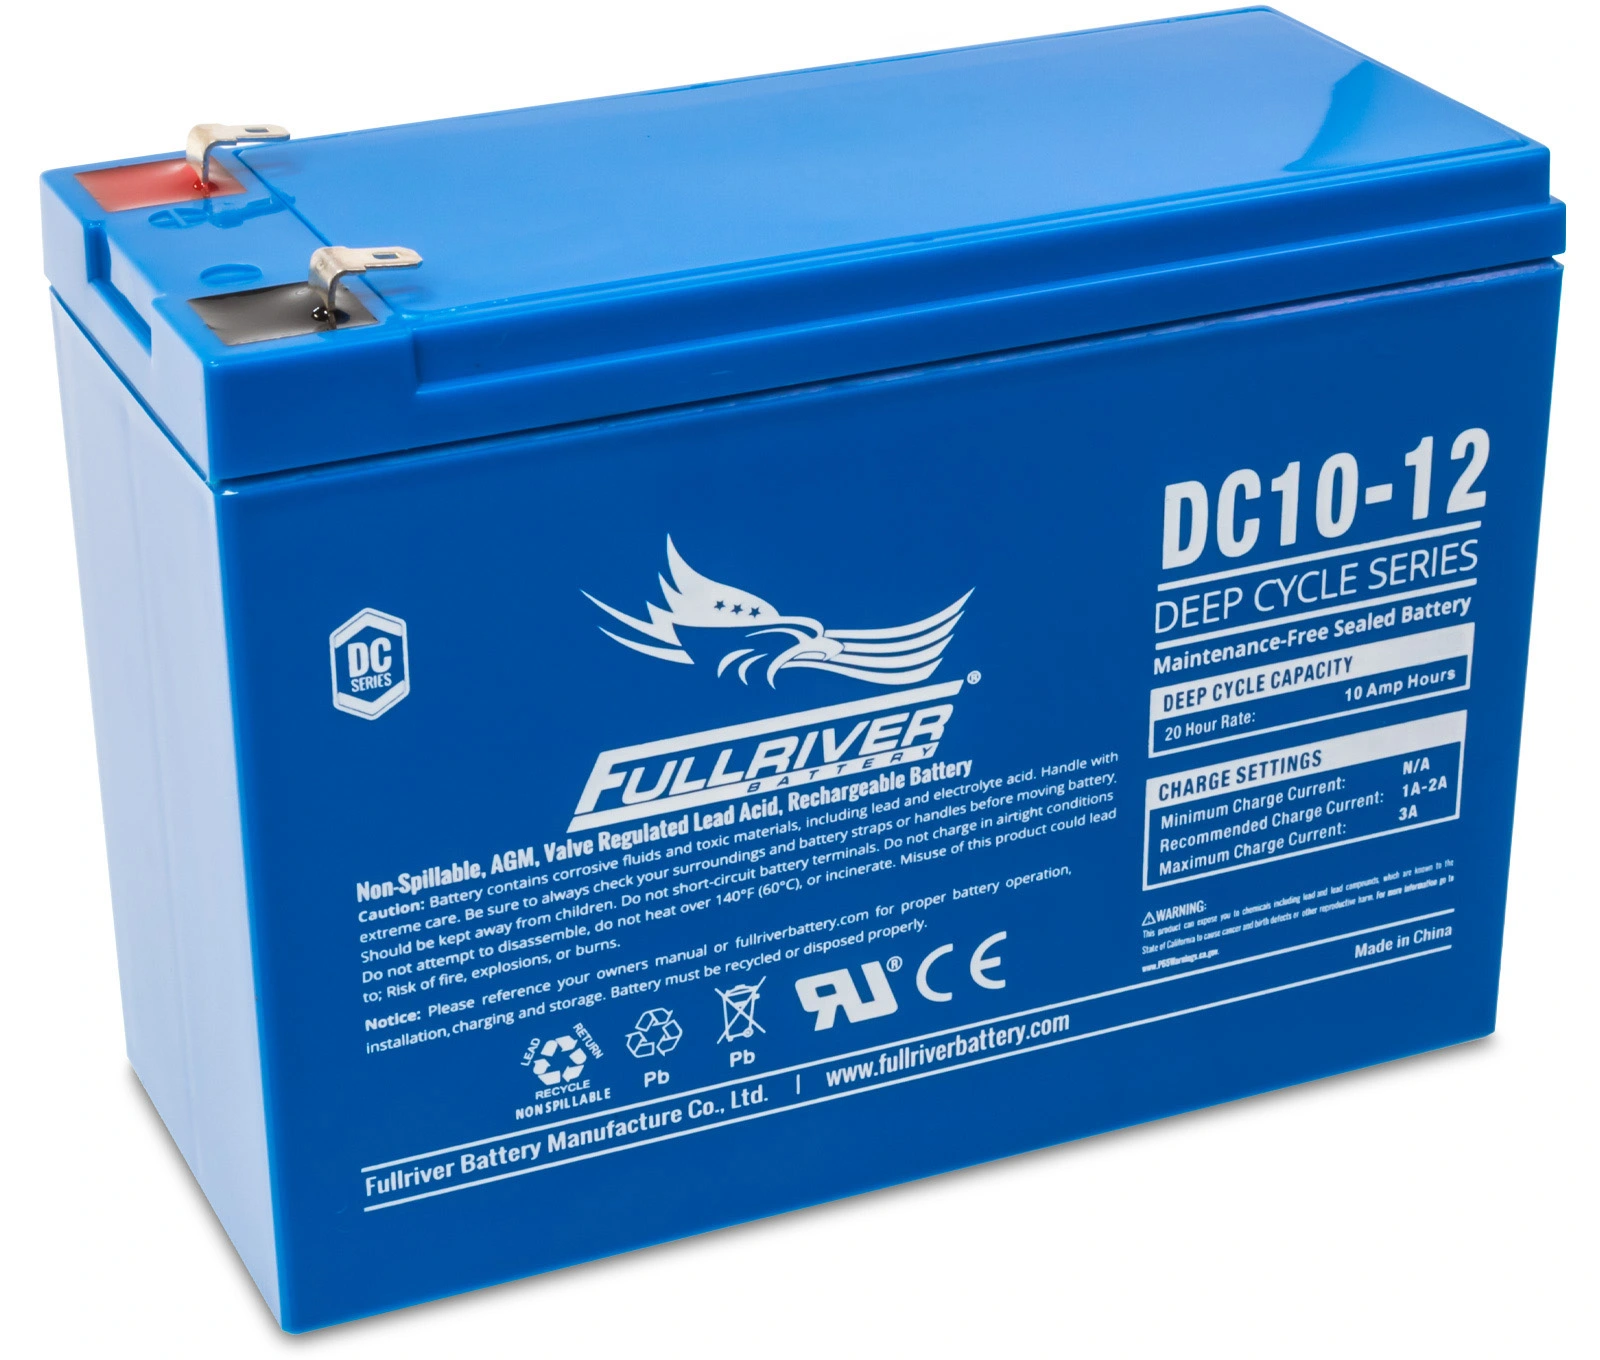 DC Series DC10-12 AGM battery from Fullriver Battery